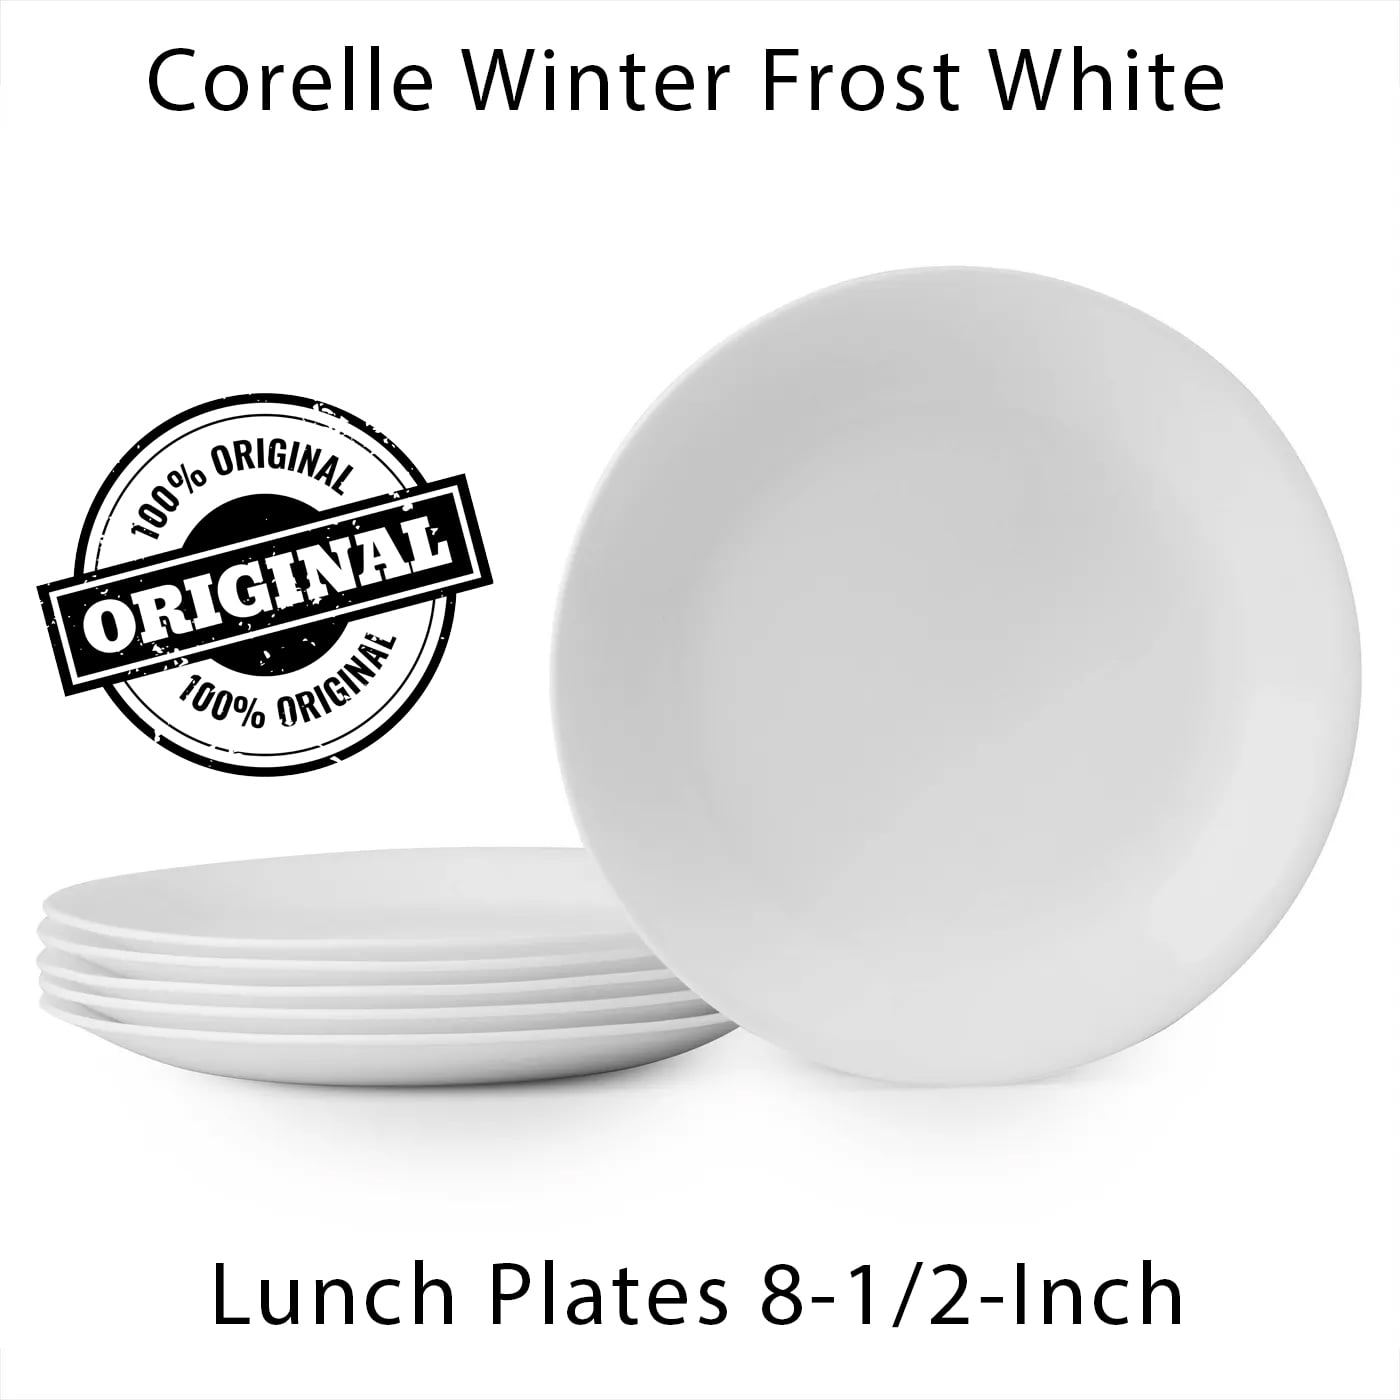 1 Corelle WHITE FROST Round DINNER or LUNCH PLATE Winter Trees Silver Moonbeams 